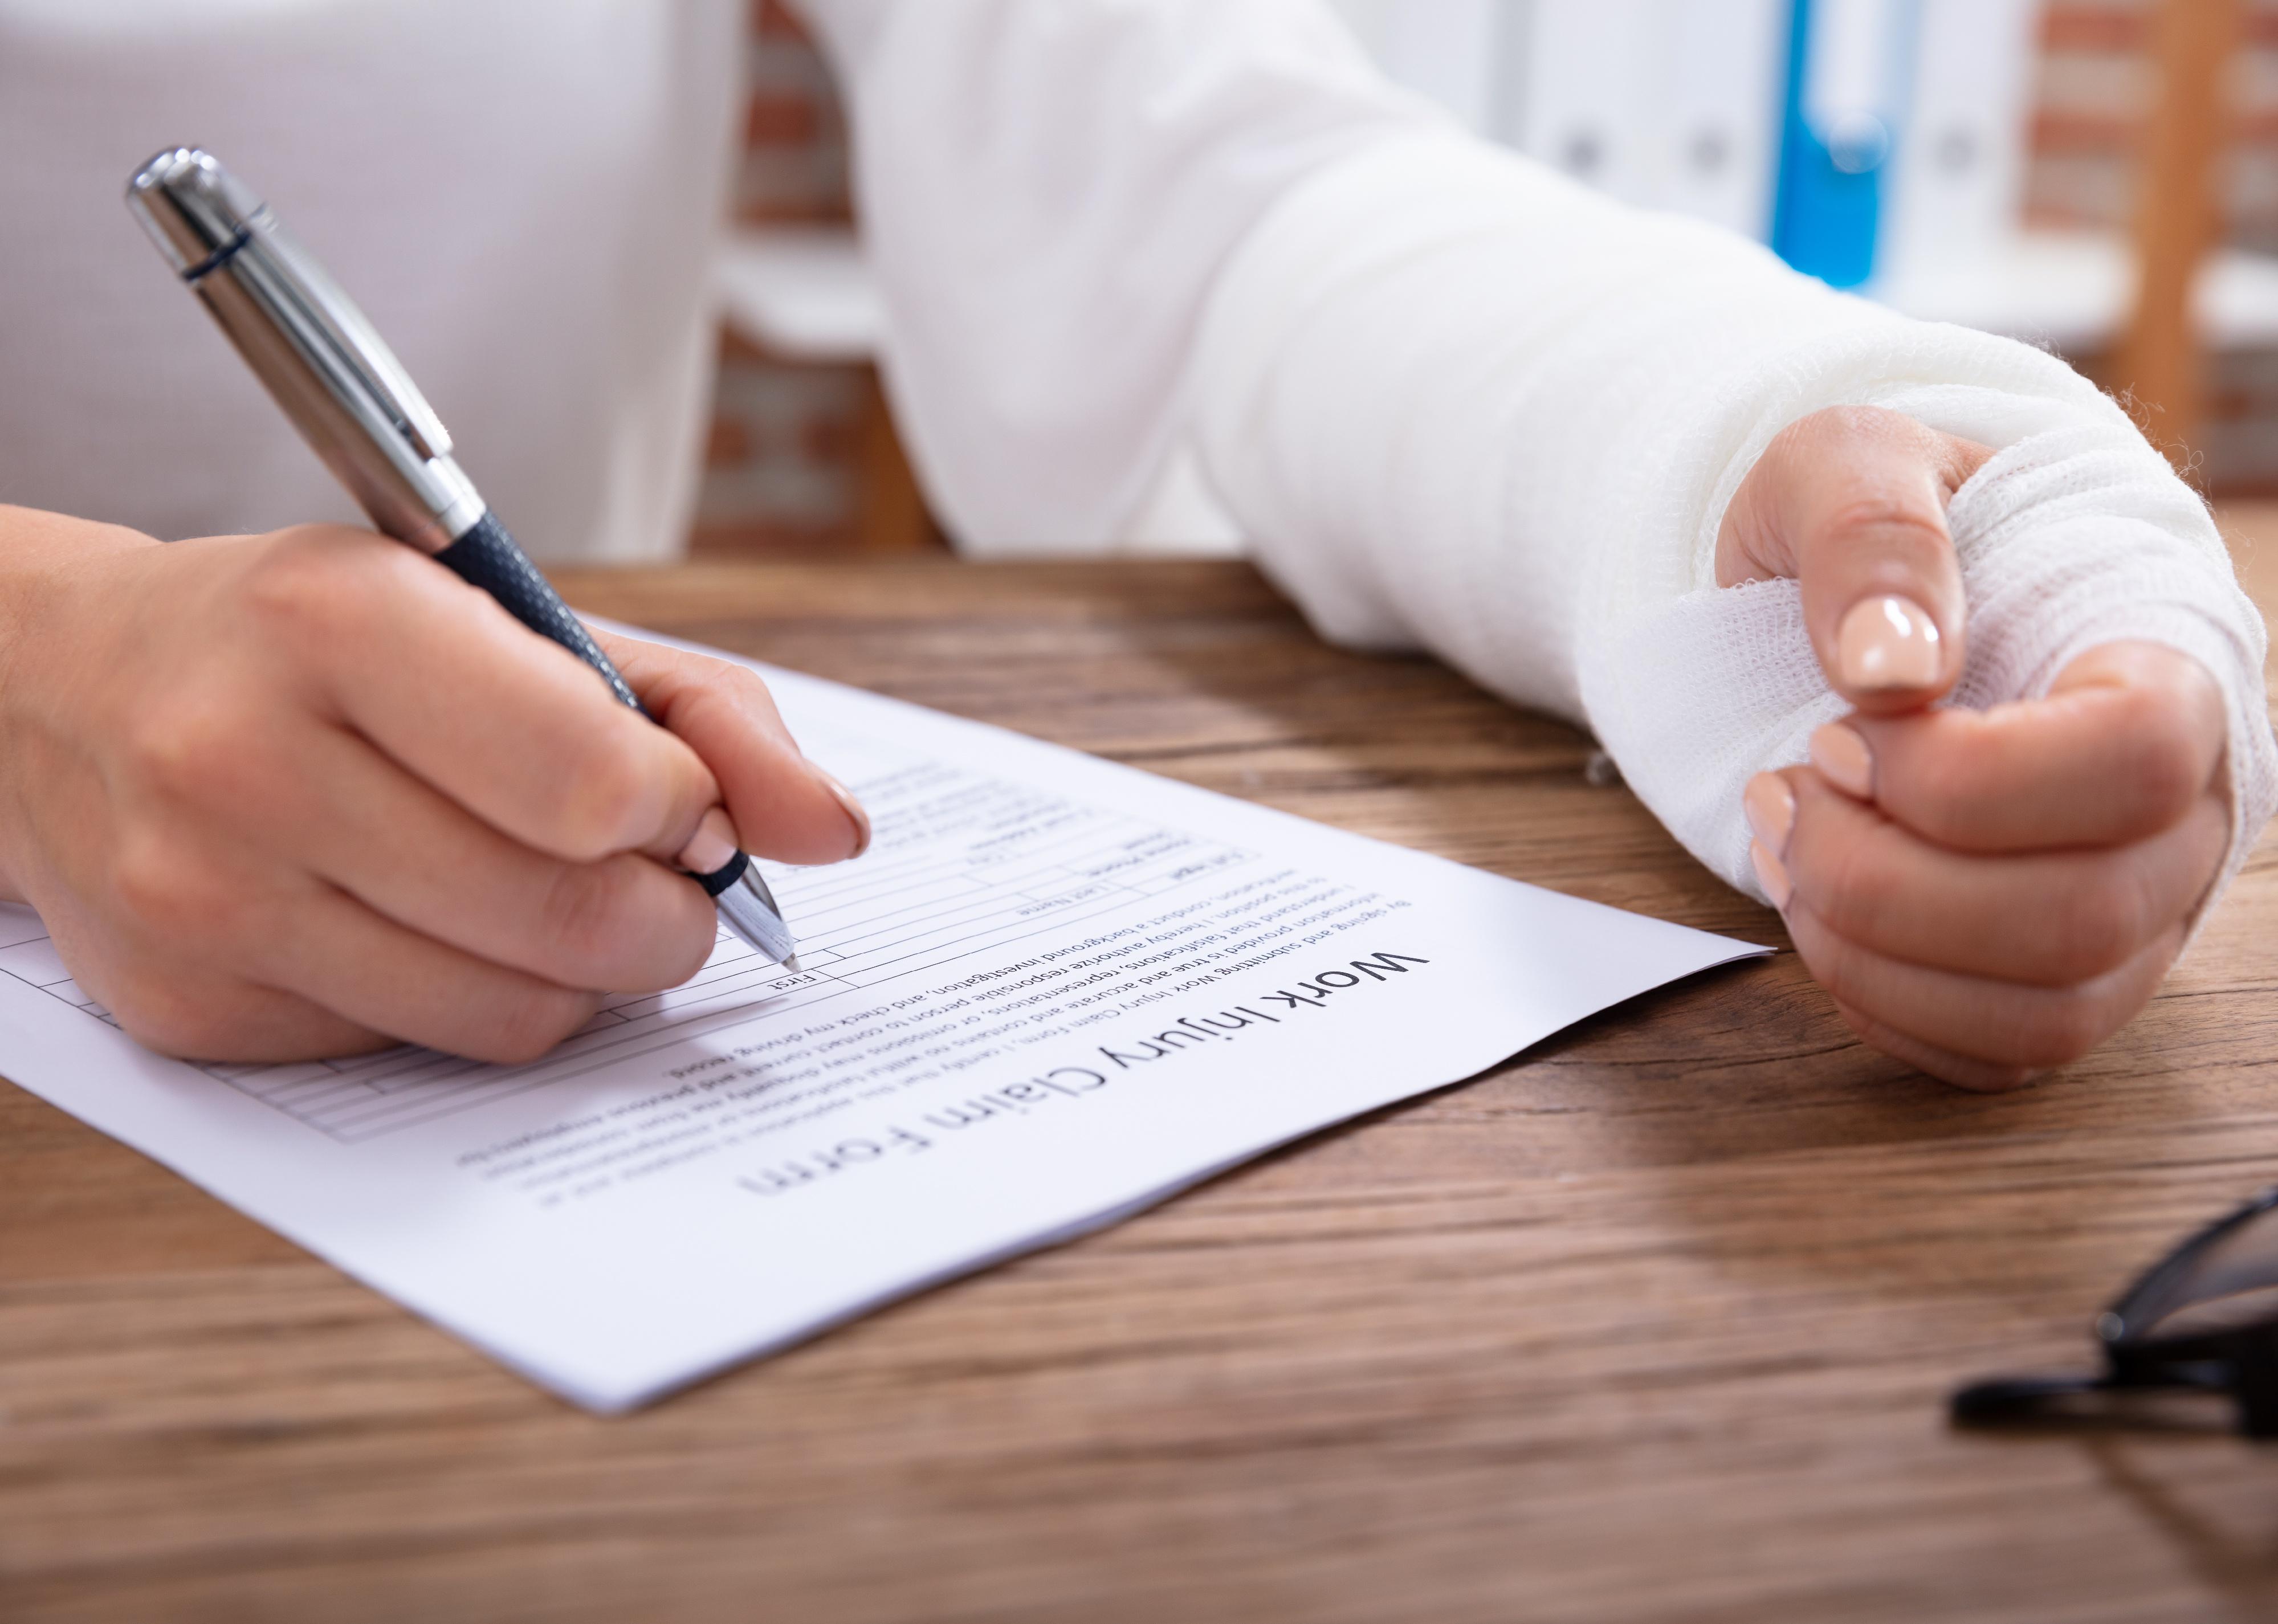 Close-up of woman with bandaged hand filling out claim form